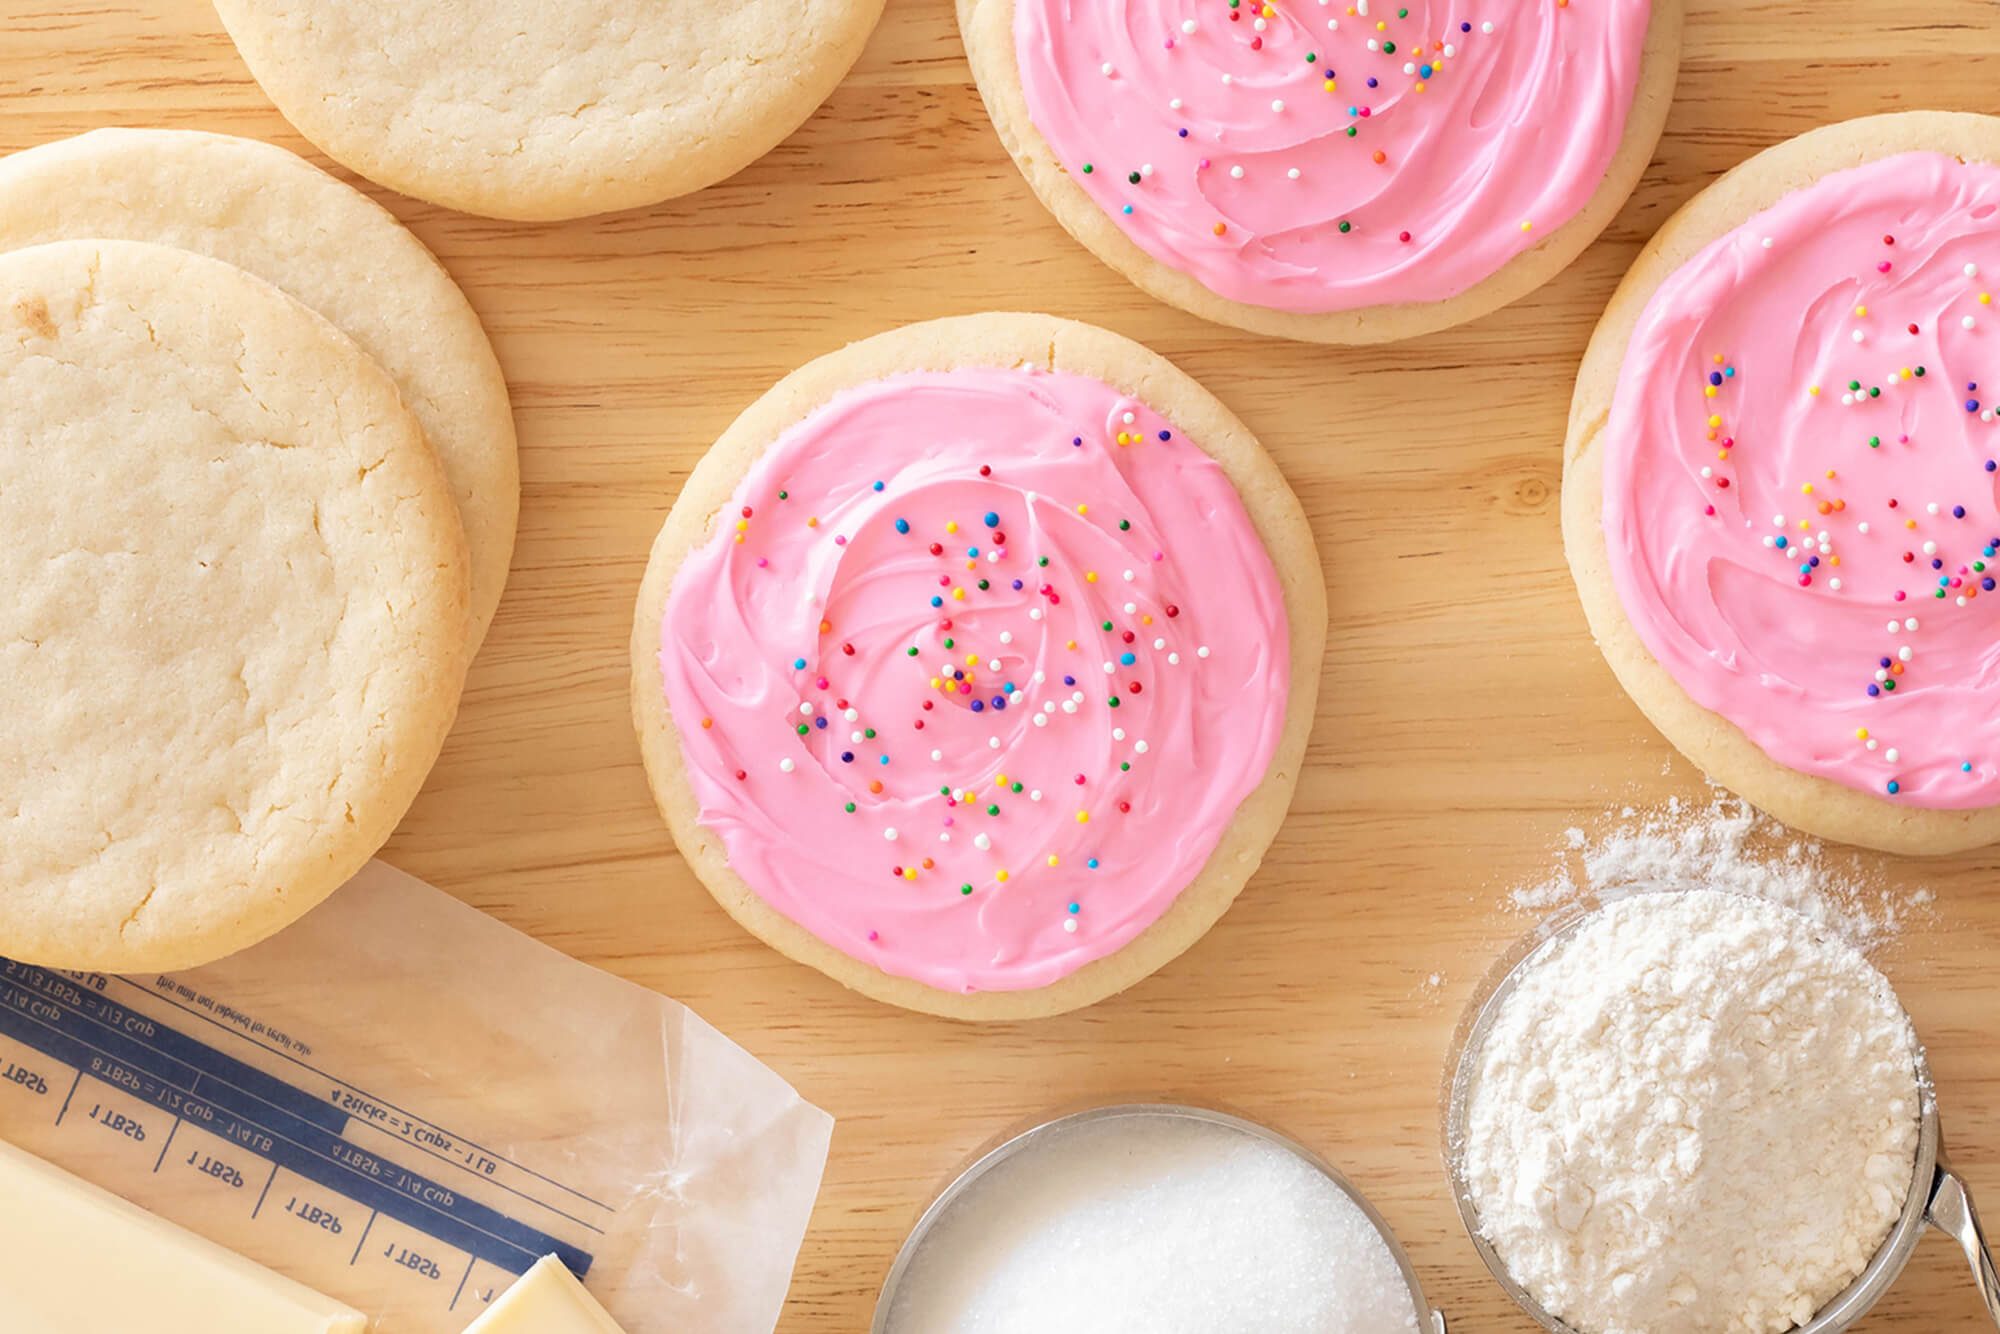 Celebrate Sugar Cookie Day with this simple recipe!